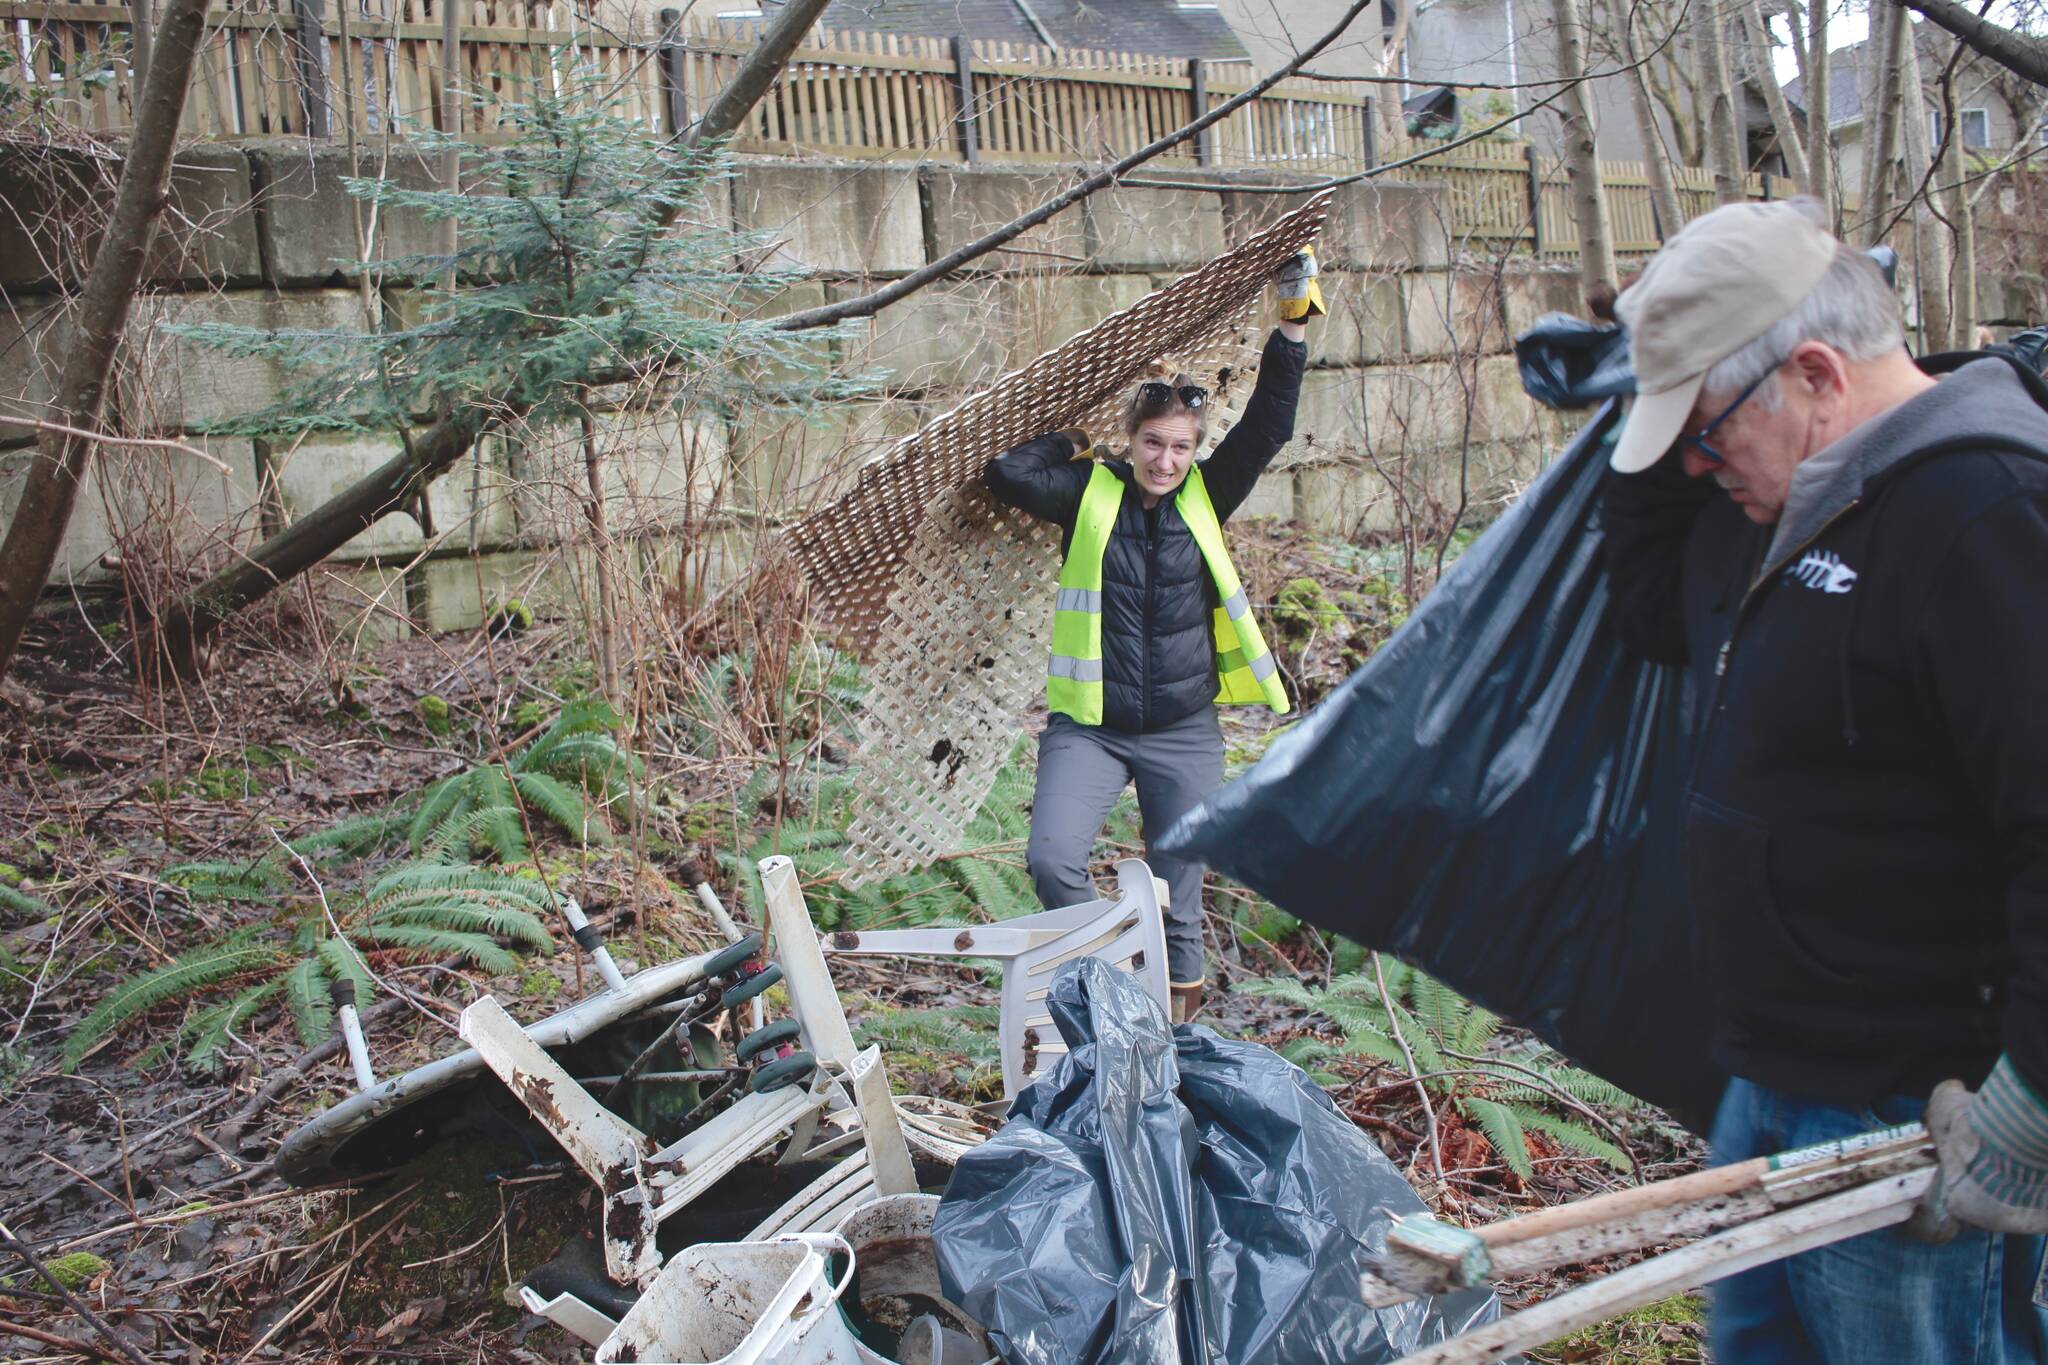 28020154_web1_220201-CRM-Streamkeepers-Bears-CLEANUP_2